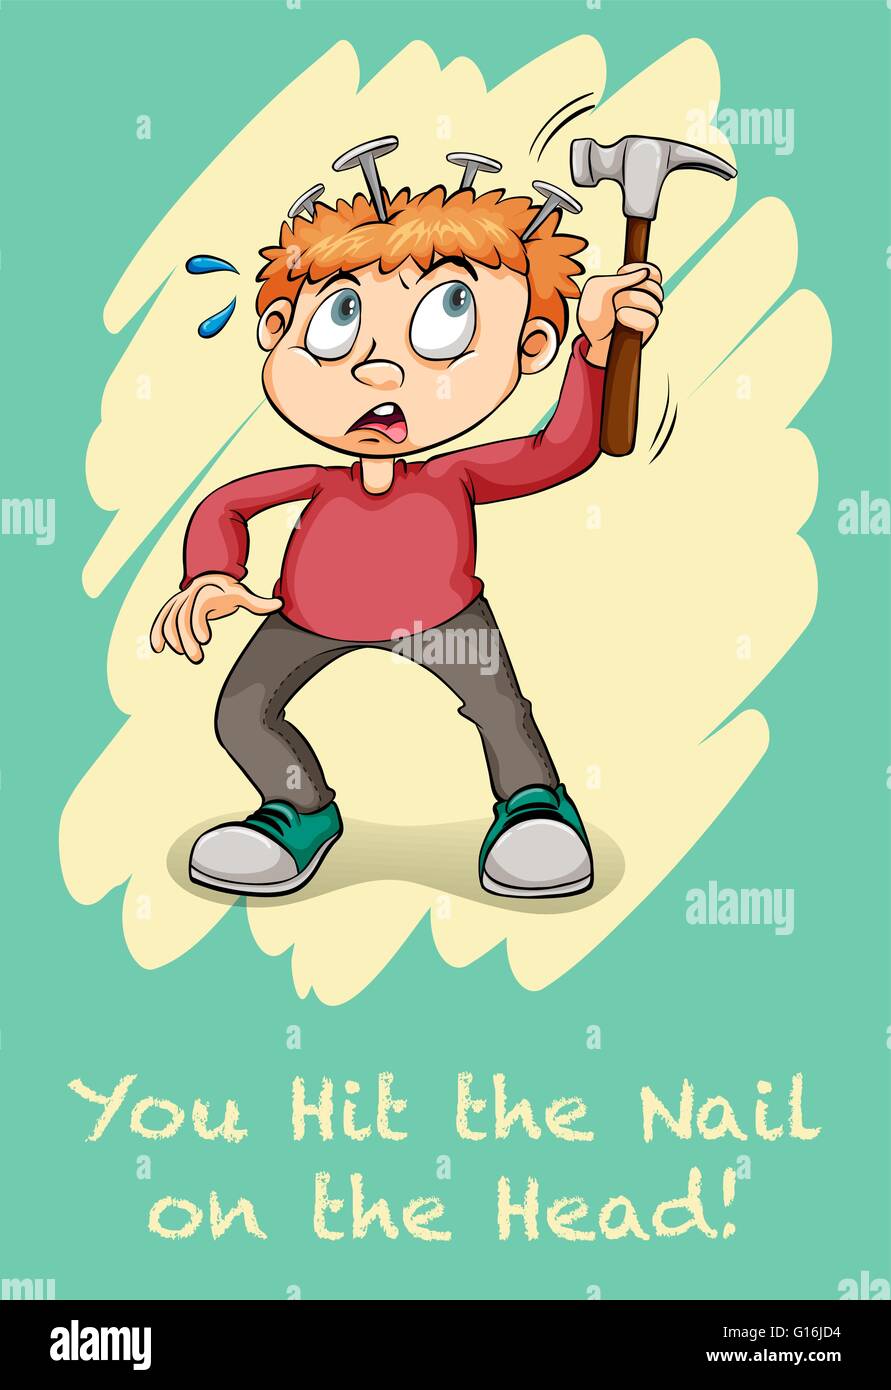 Hit the nail on the head illustration Stock Vector